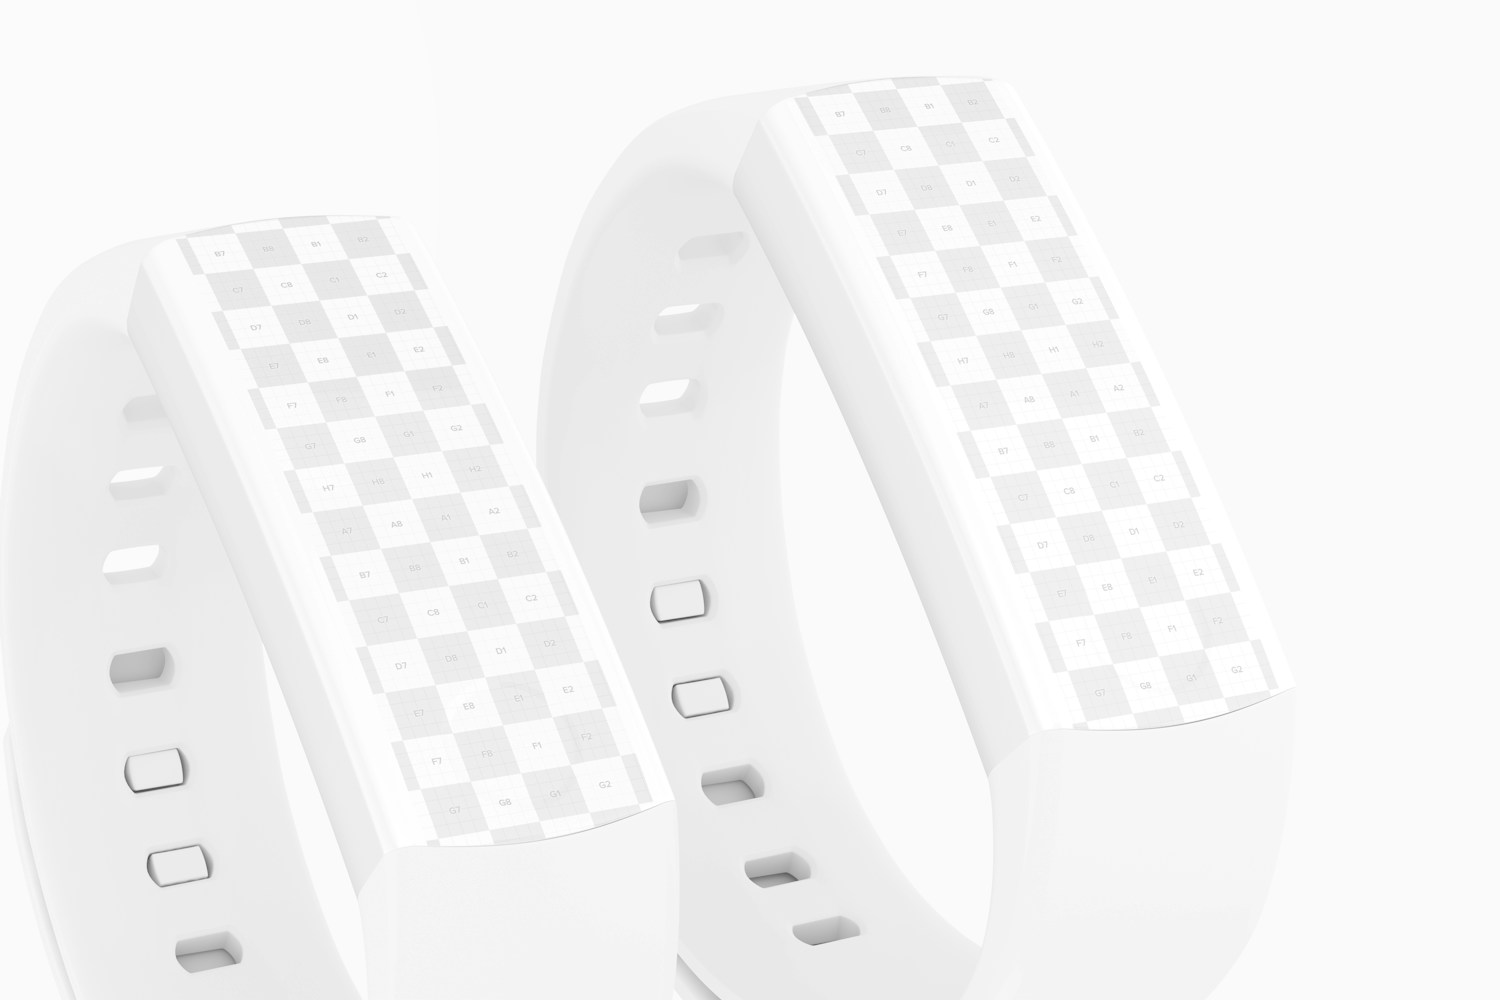 Huawei Fit Honor Band 3 Smart Watch Mockup, Close Up